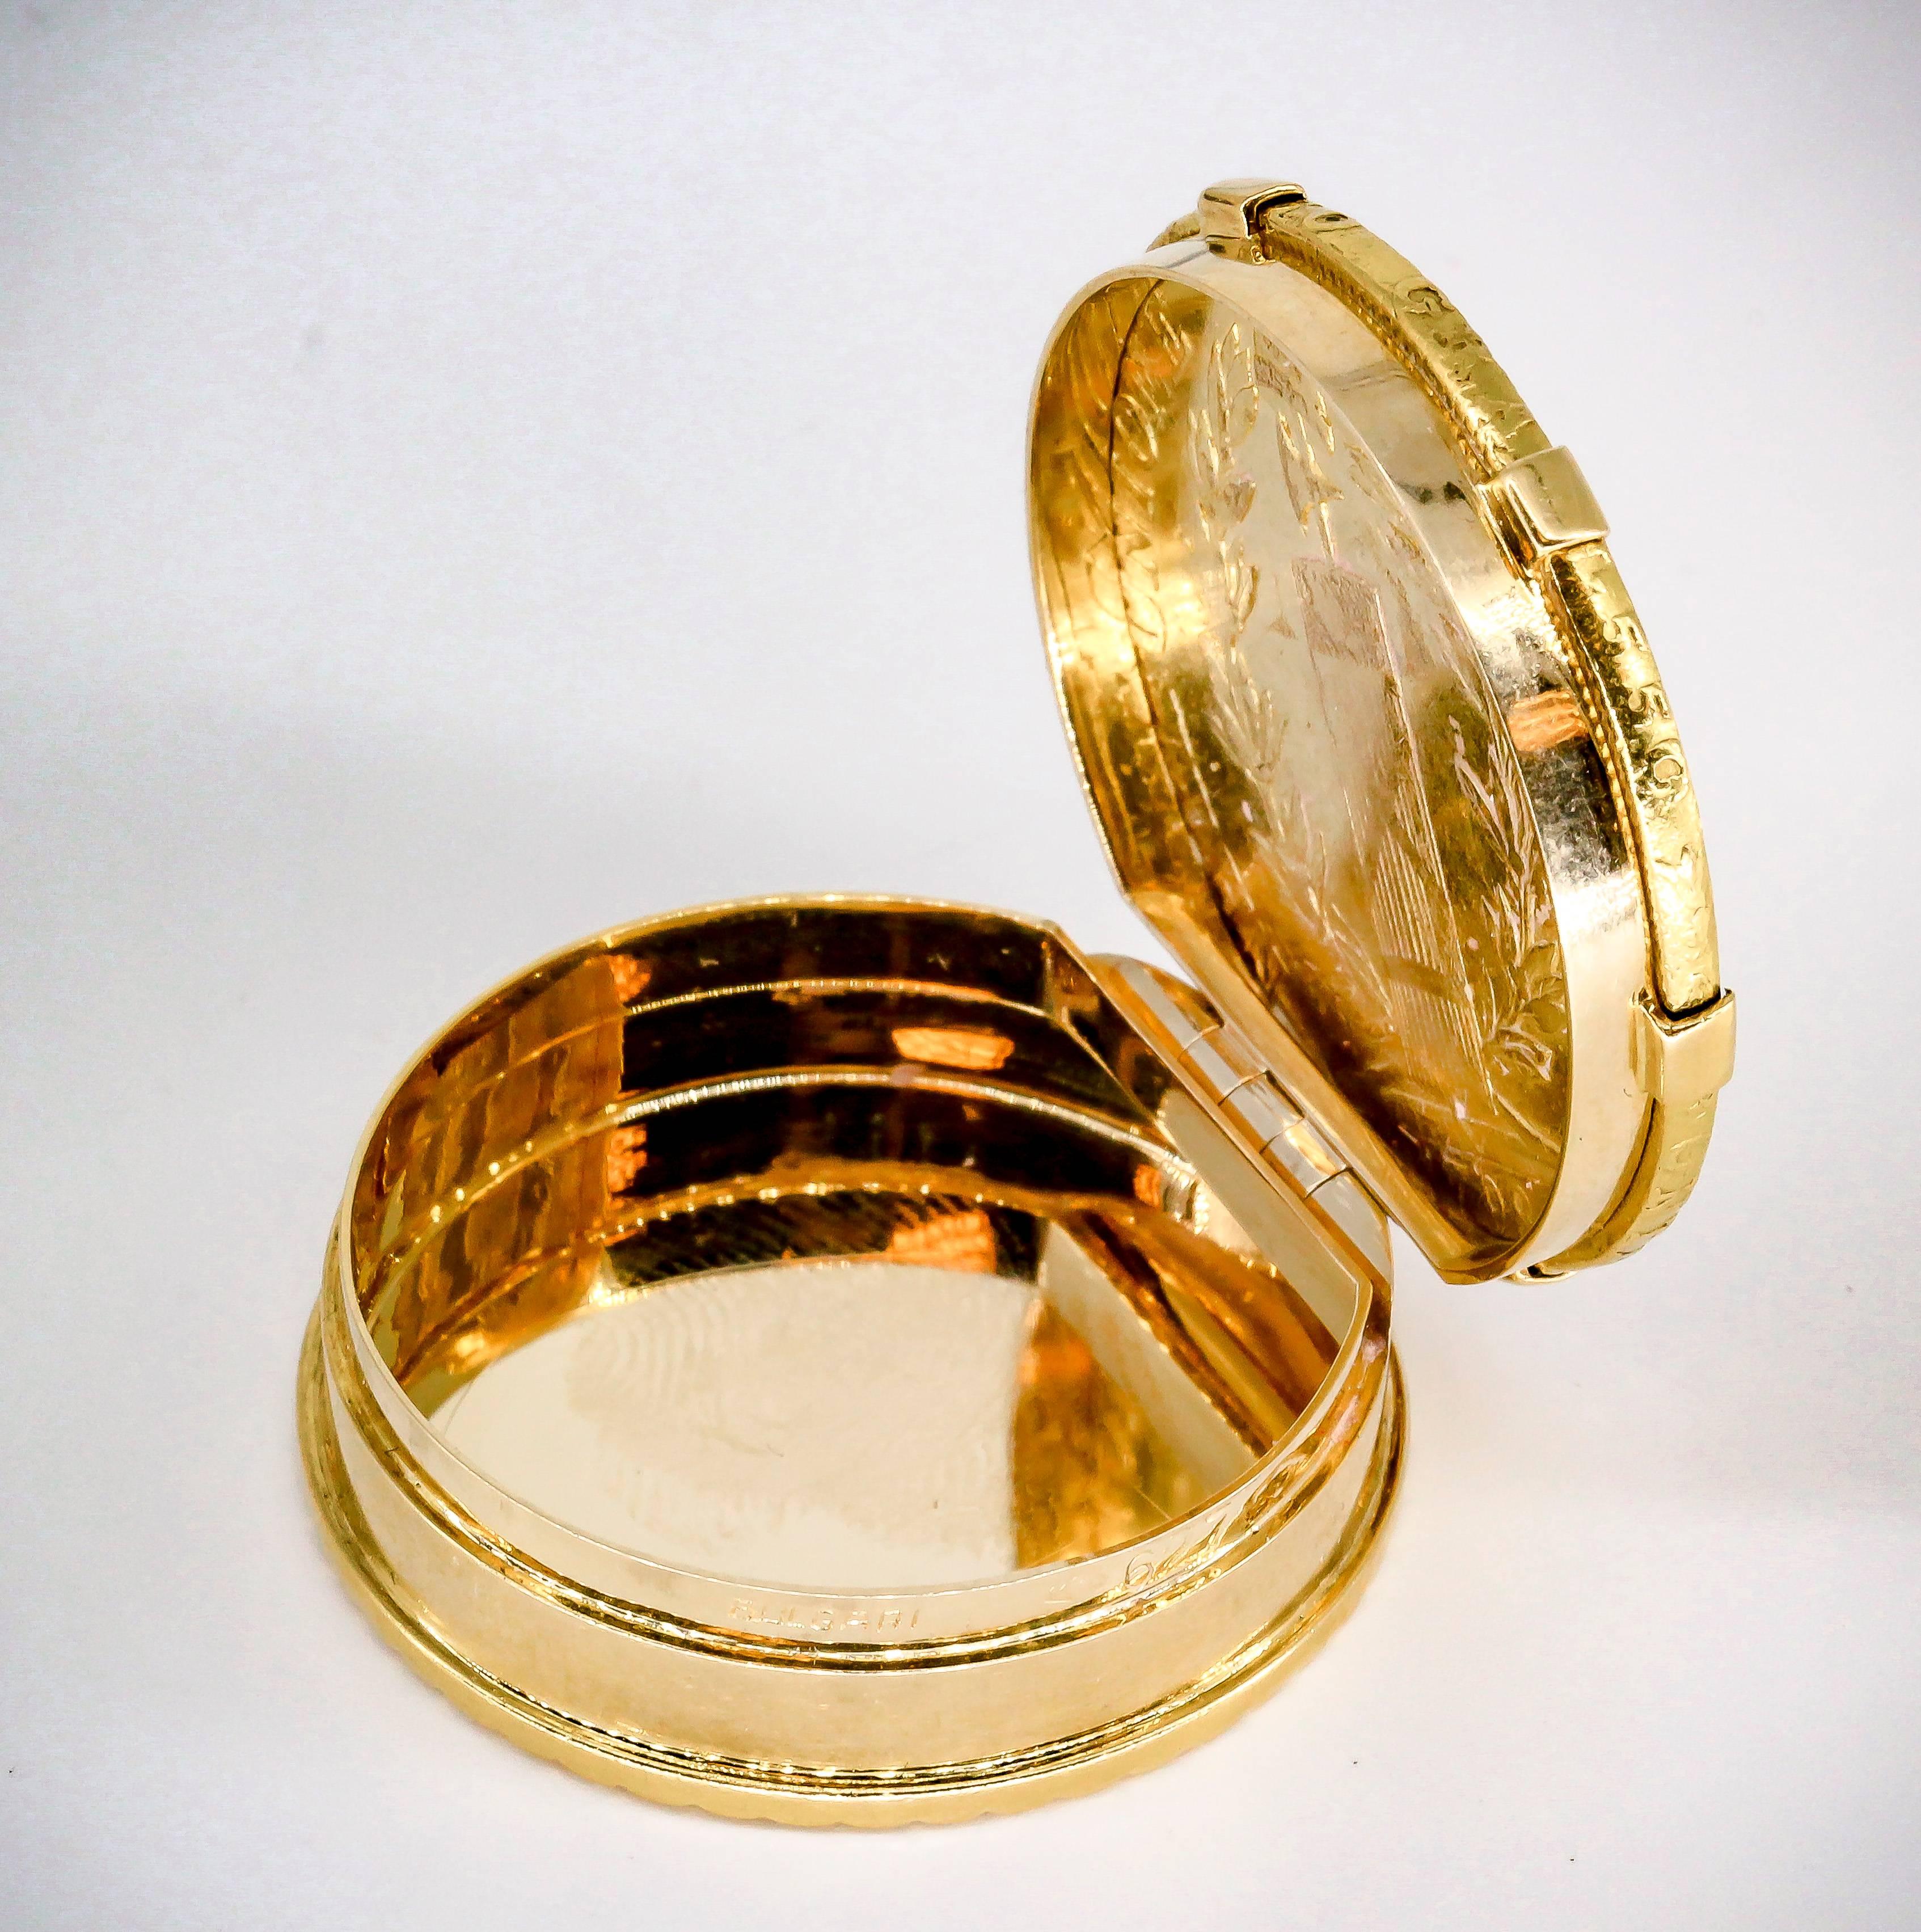 Stylish yellow 18K gold pill box by Bulgari with an ancient Italian 22K gold coin as the top. Coin is from 1798-1805 and it's 96 lire (Italian currency). The pill box is built around the coin in 18K yellow gold, with circularly ribbed